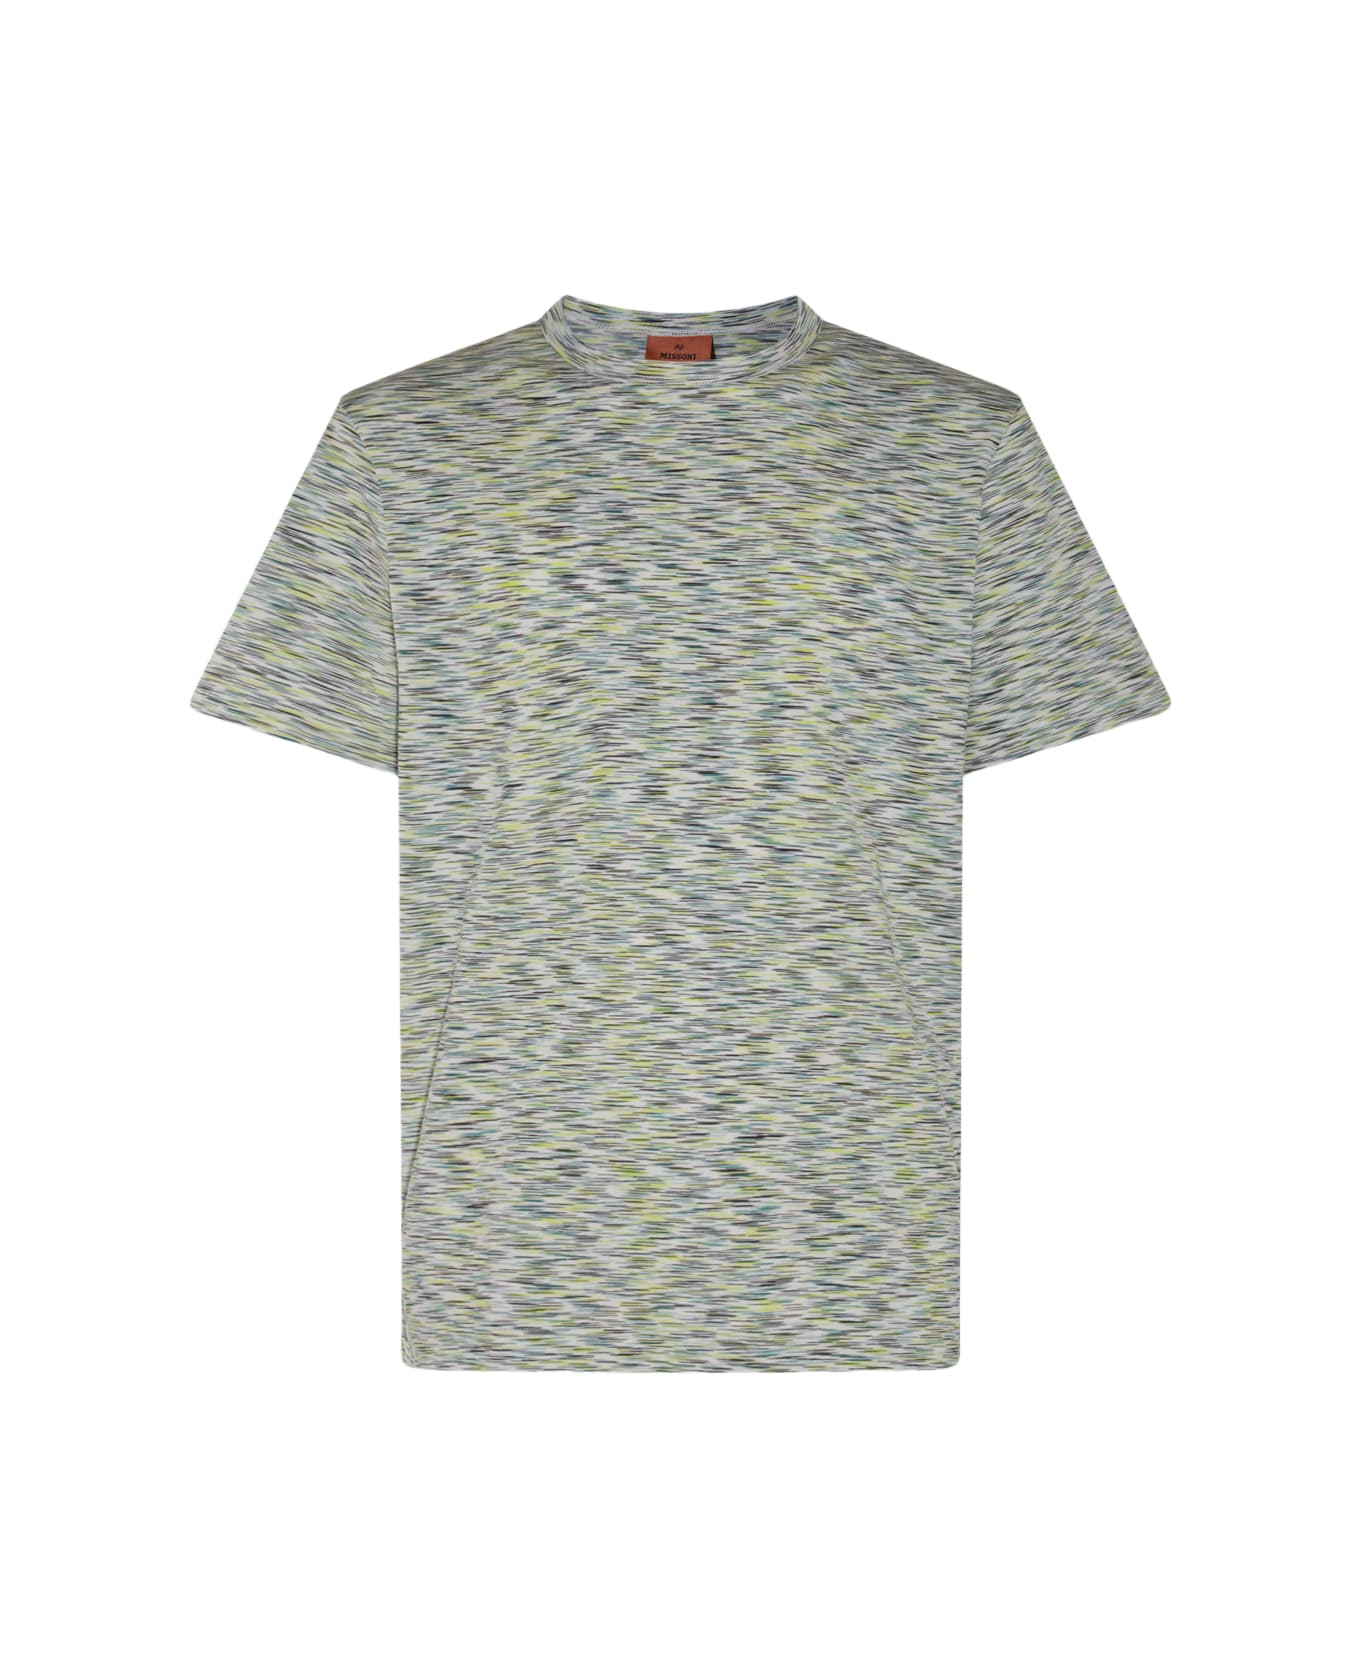 Missoni Multicolor Cotton T-shirt - LIME GREEN SPACE DYED